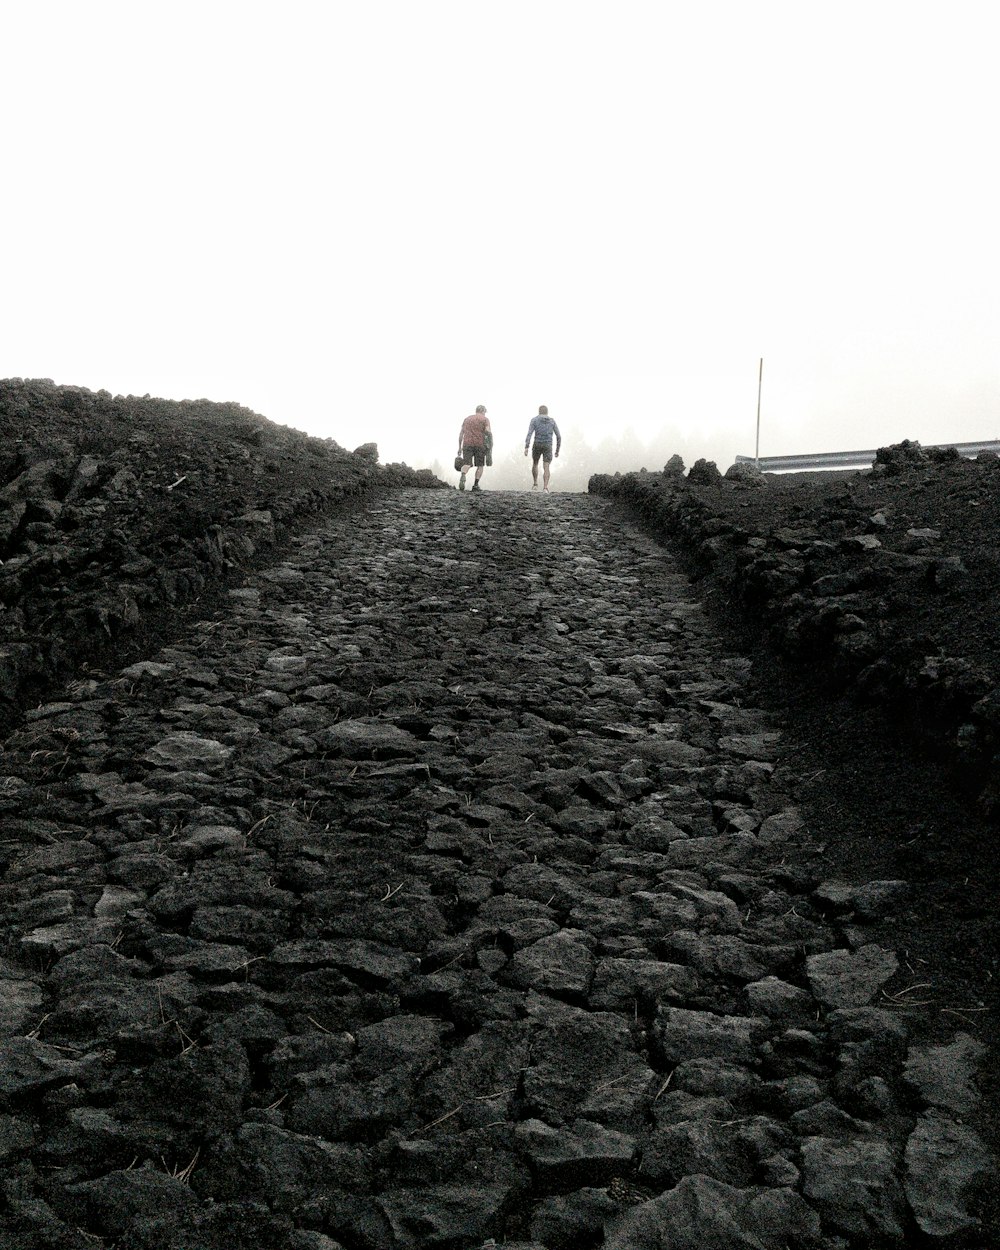 photo of two persons walking on rocky pathway